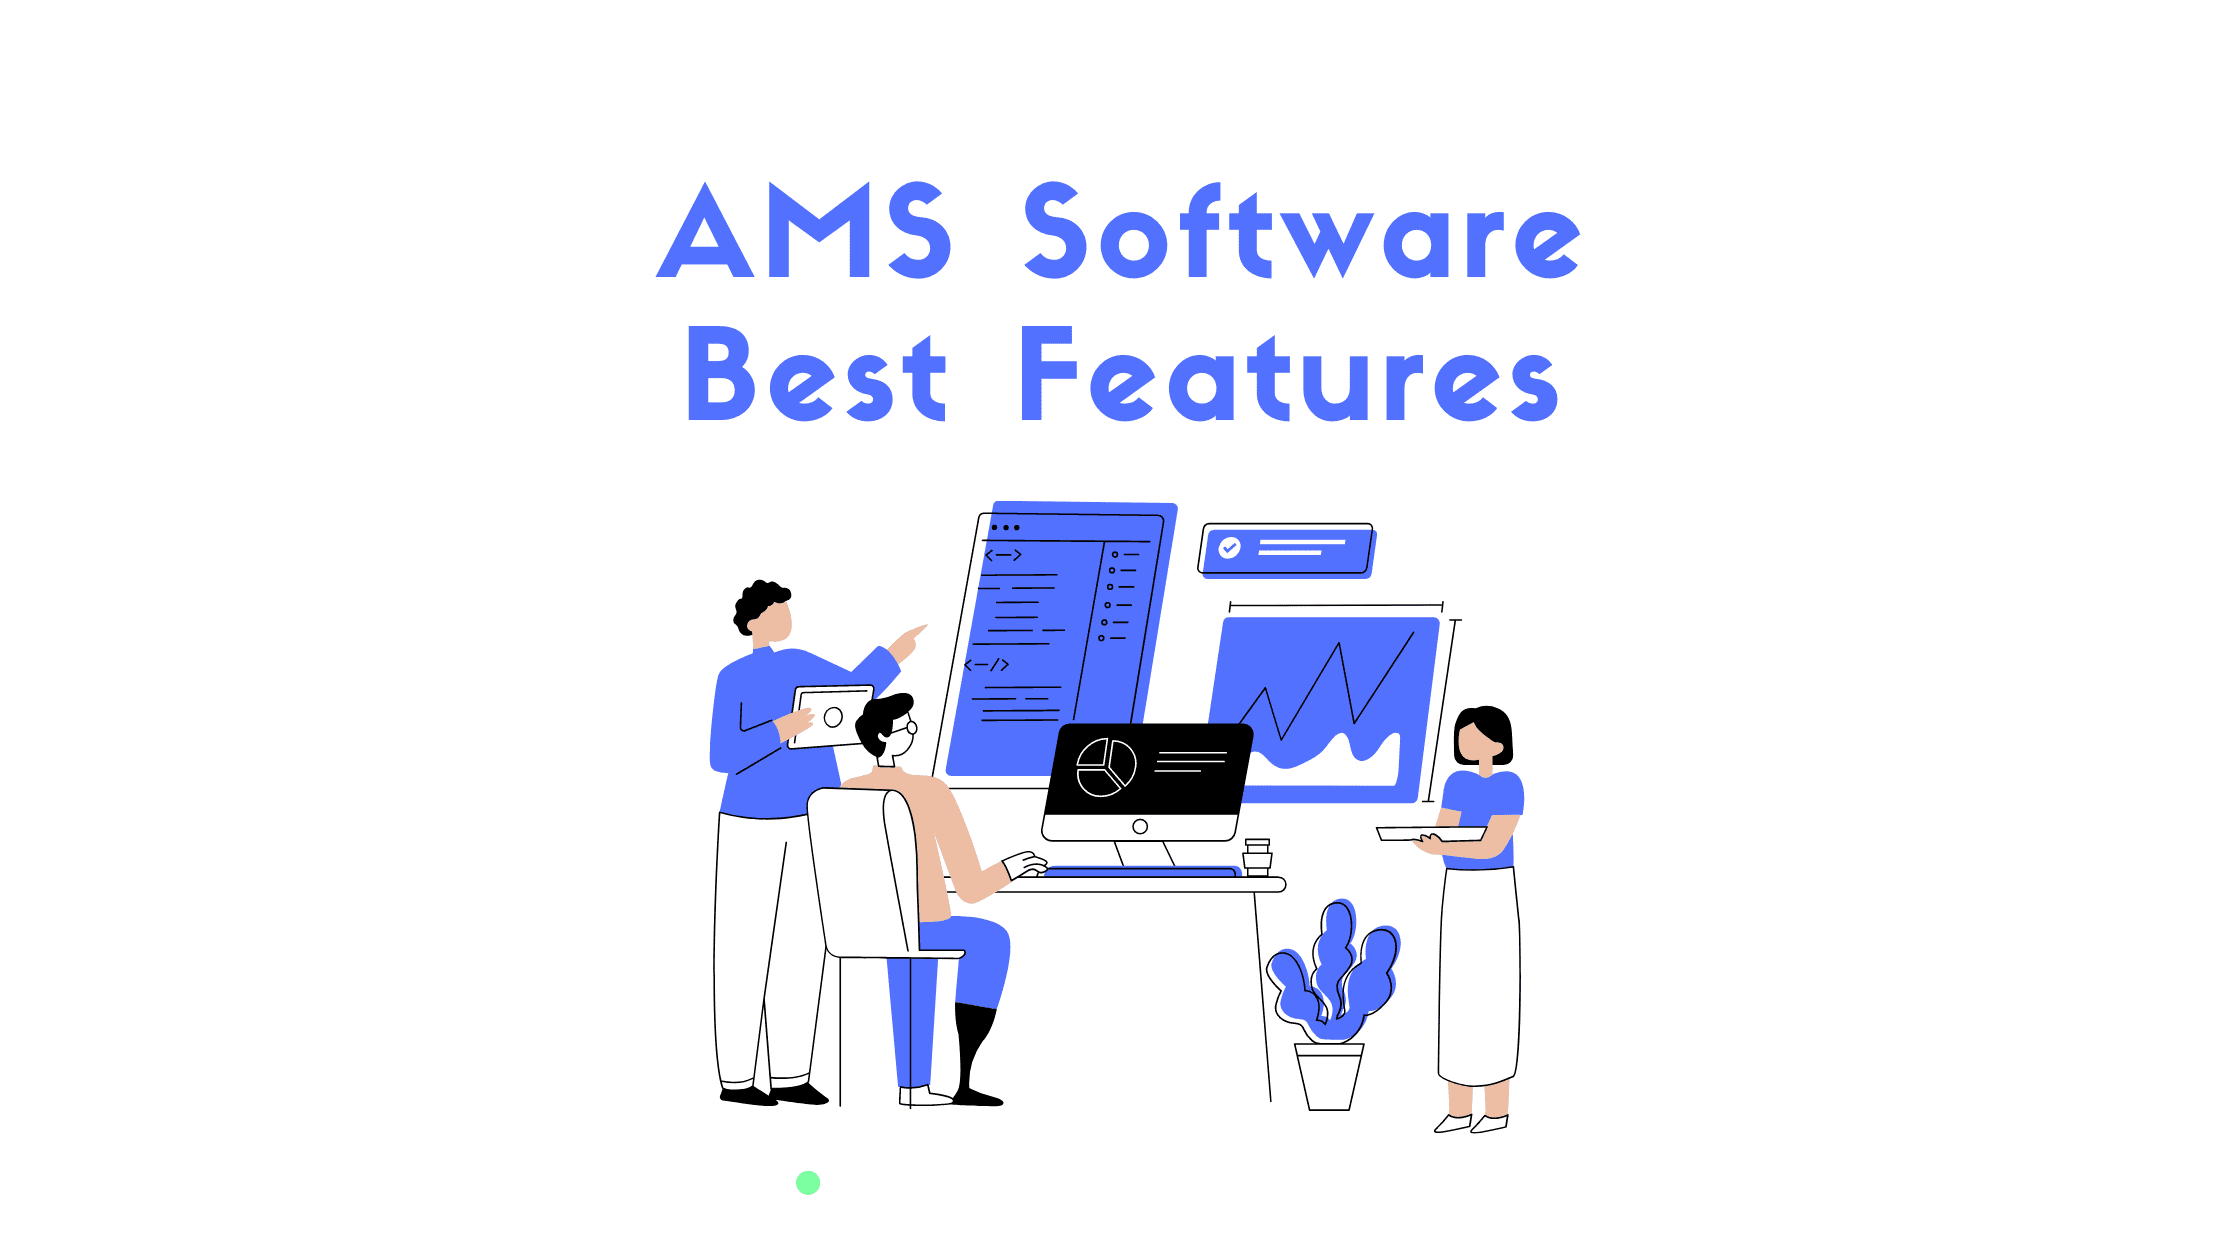 AMS software